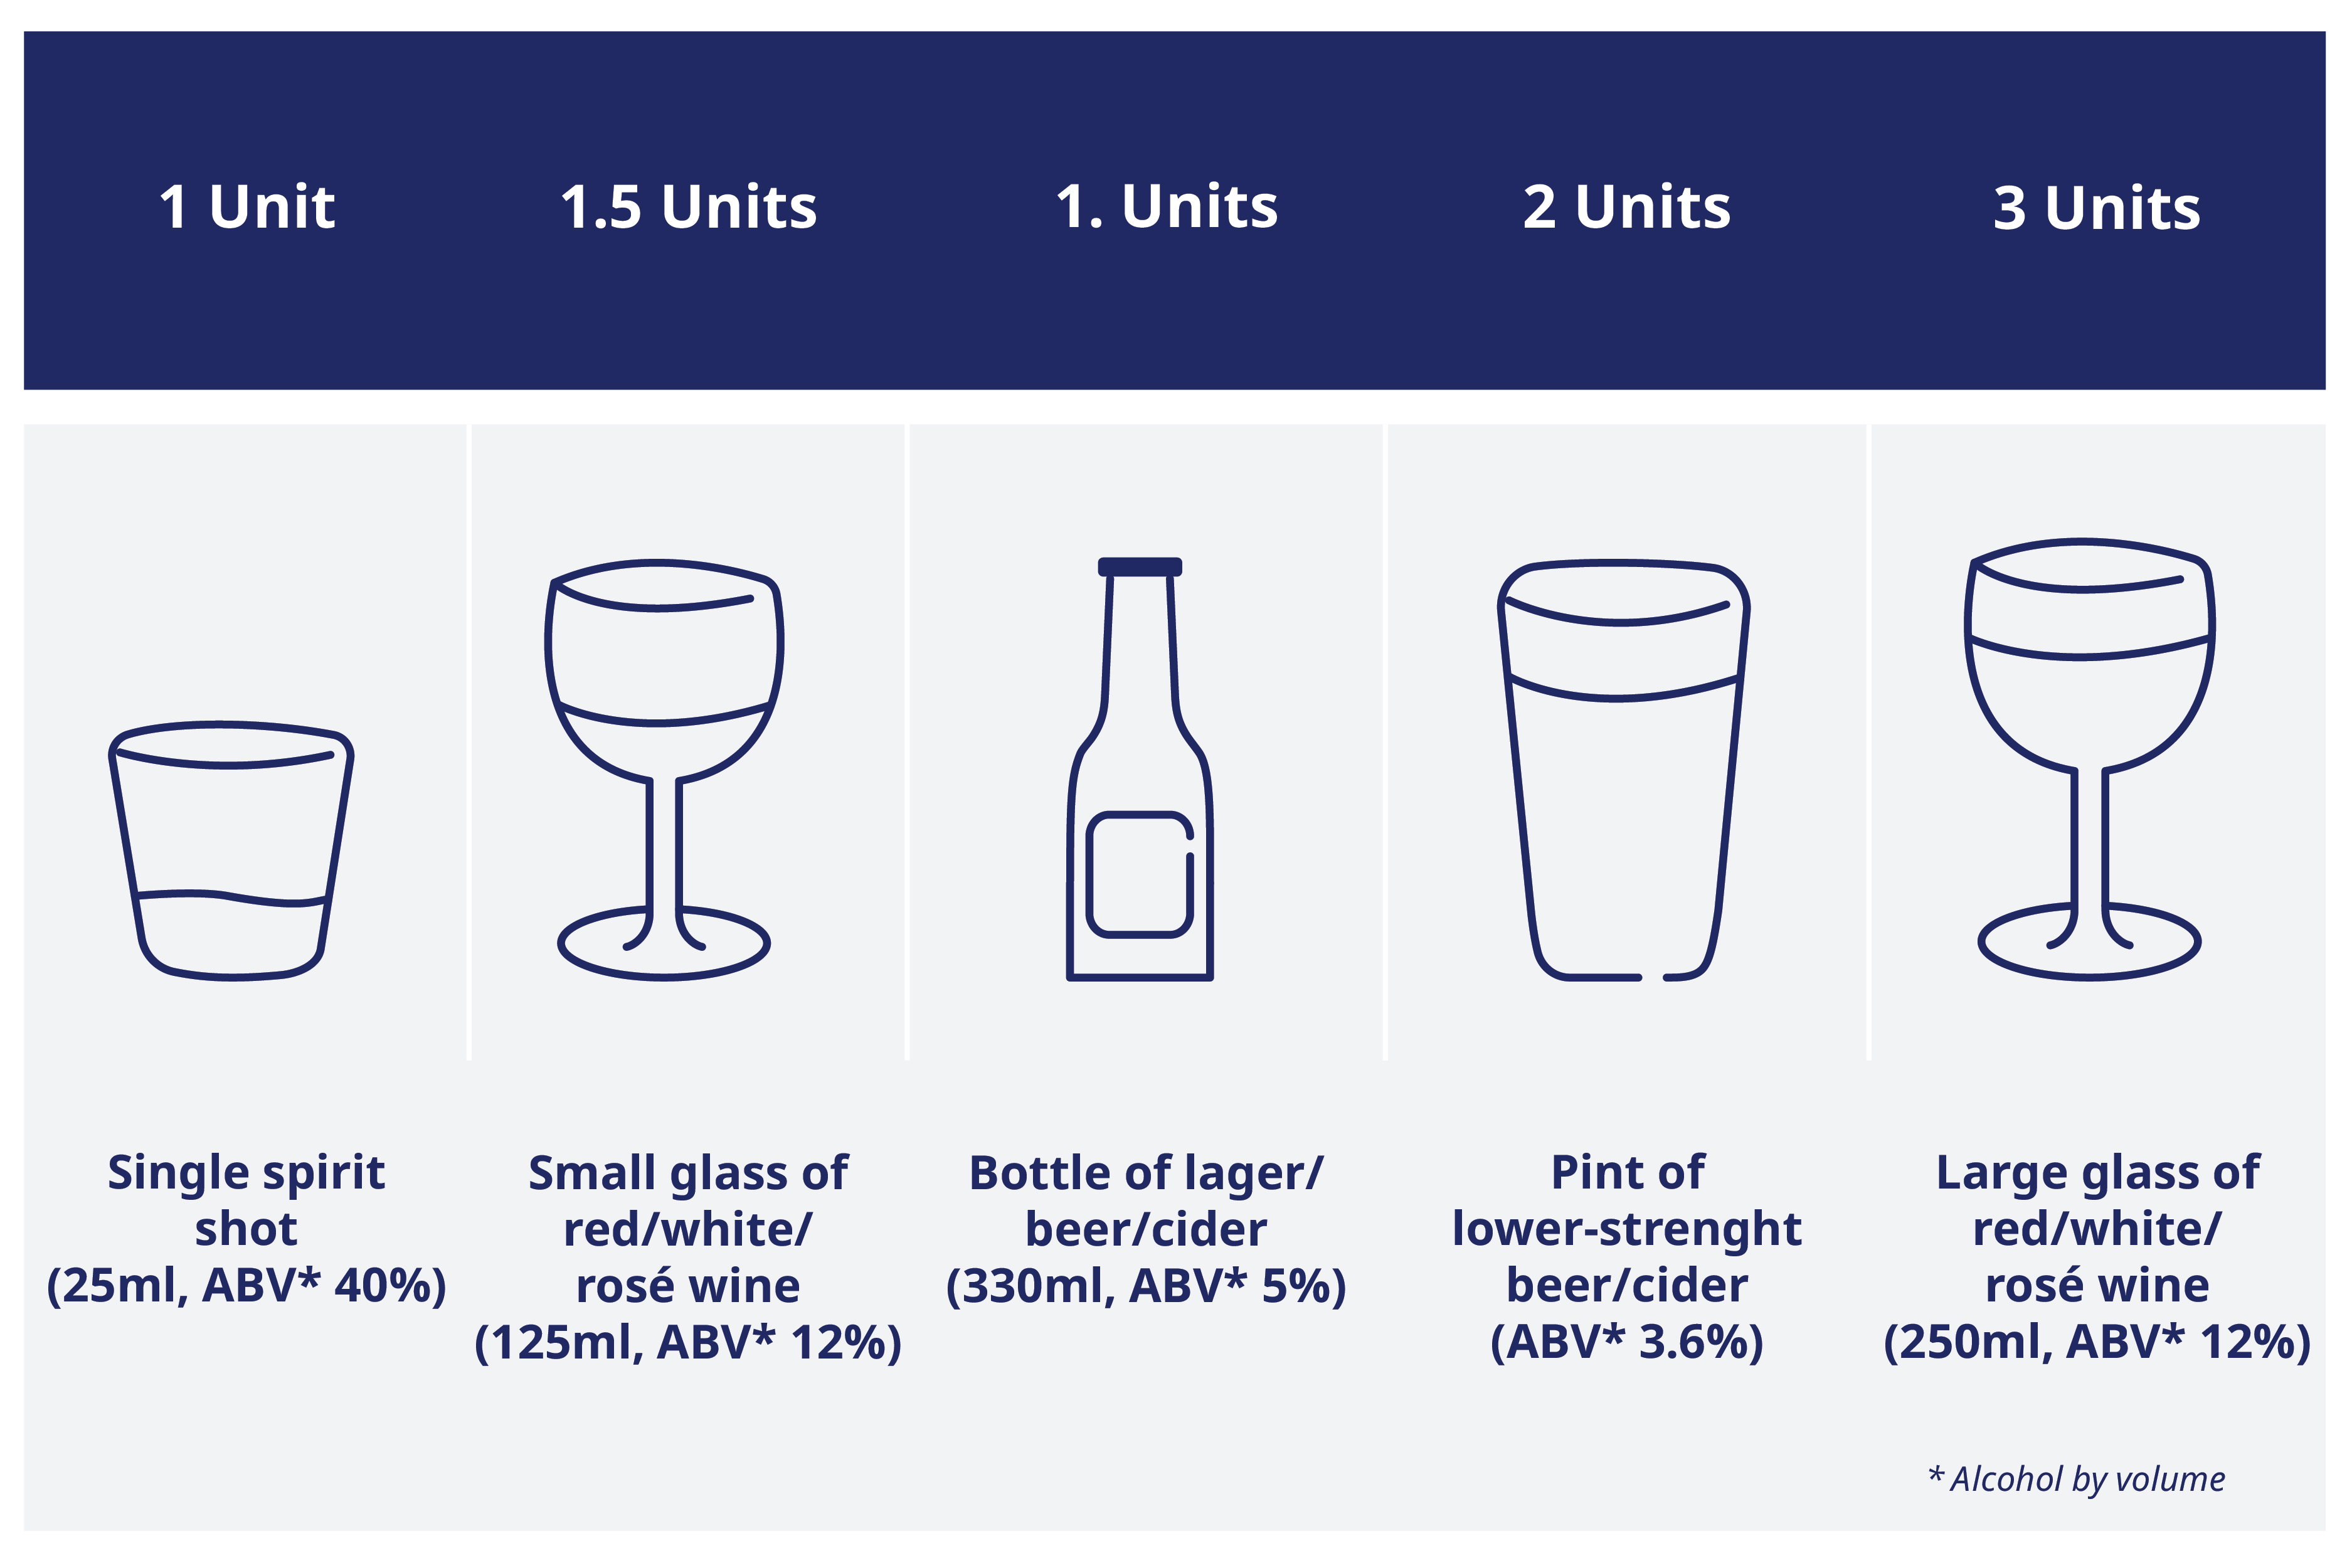 Type 1 diabetes and alcohol